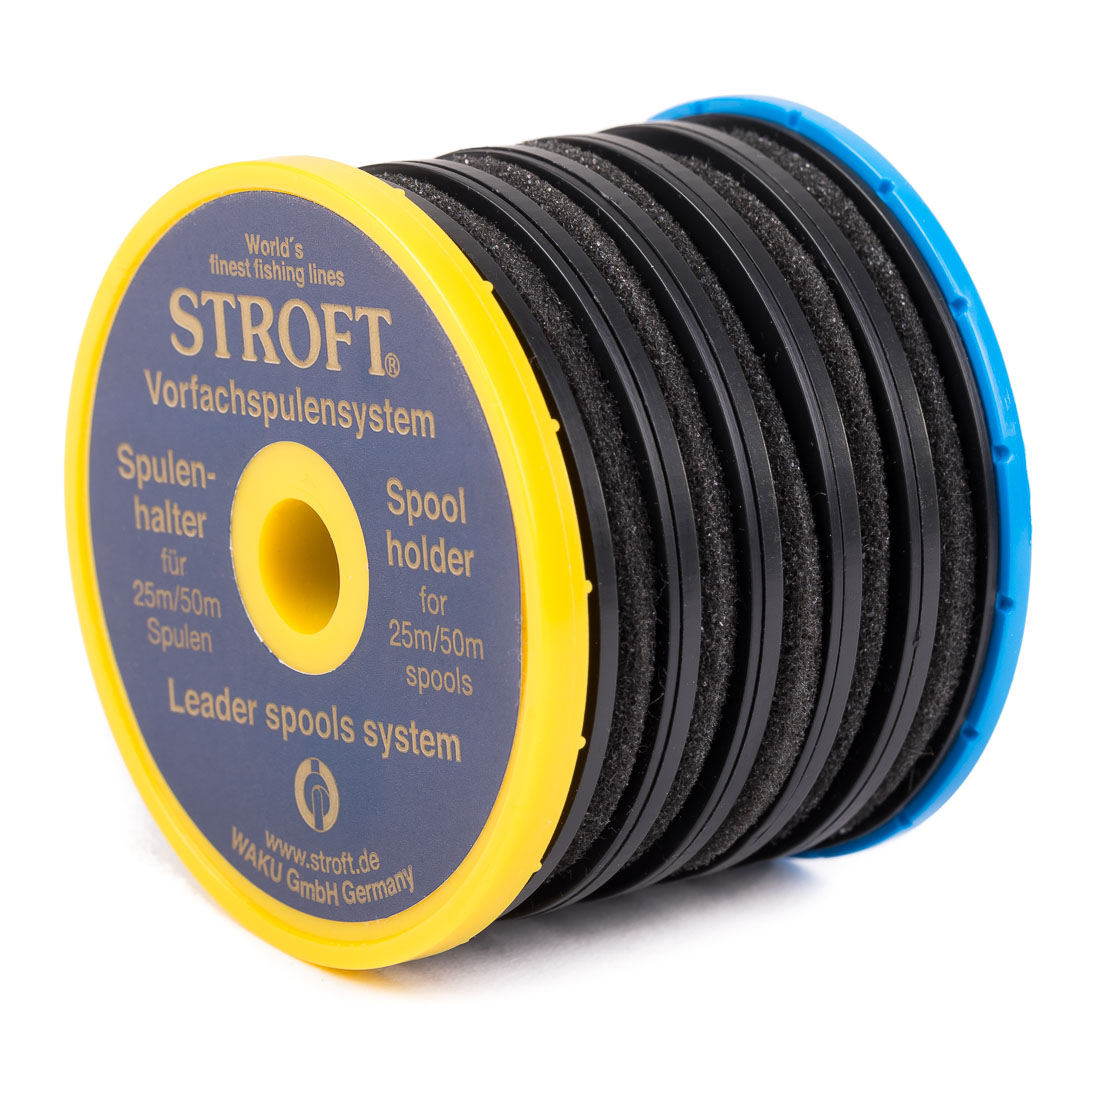 Stroft Leader Spool Holder for 5 Spools, Line Accessories, Fly Lines